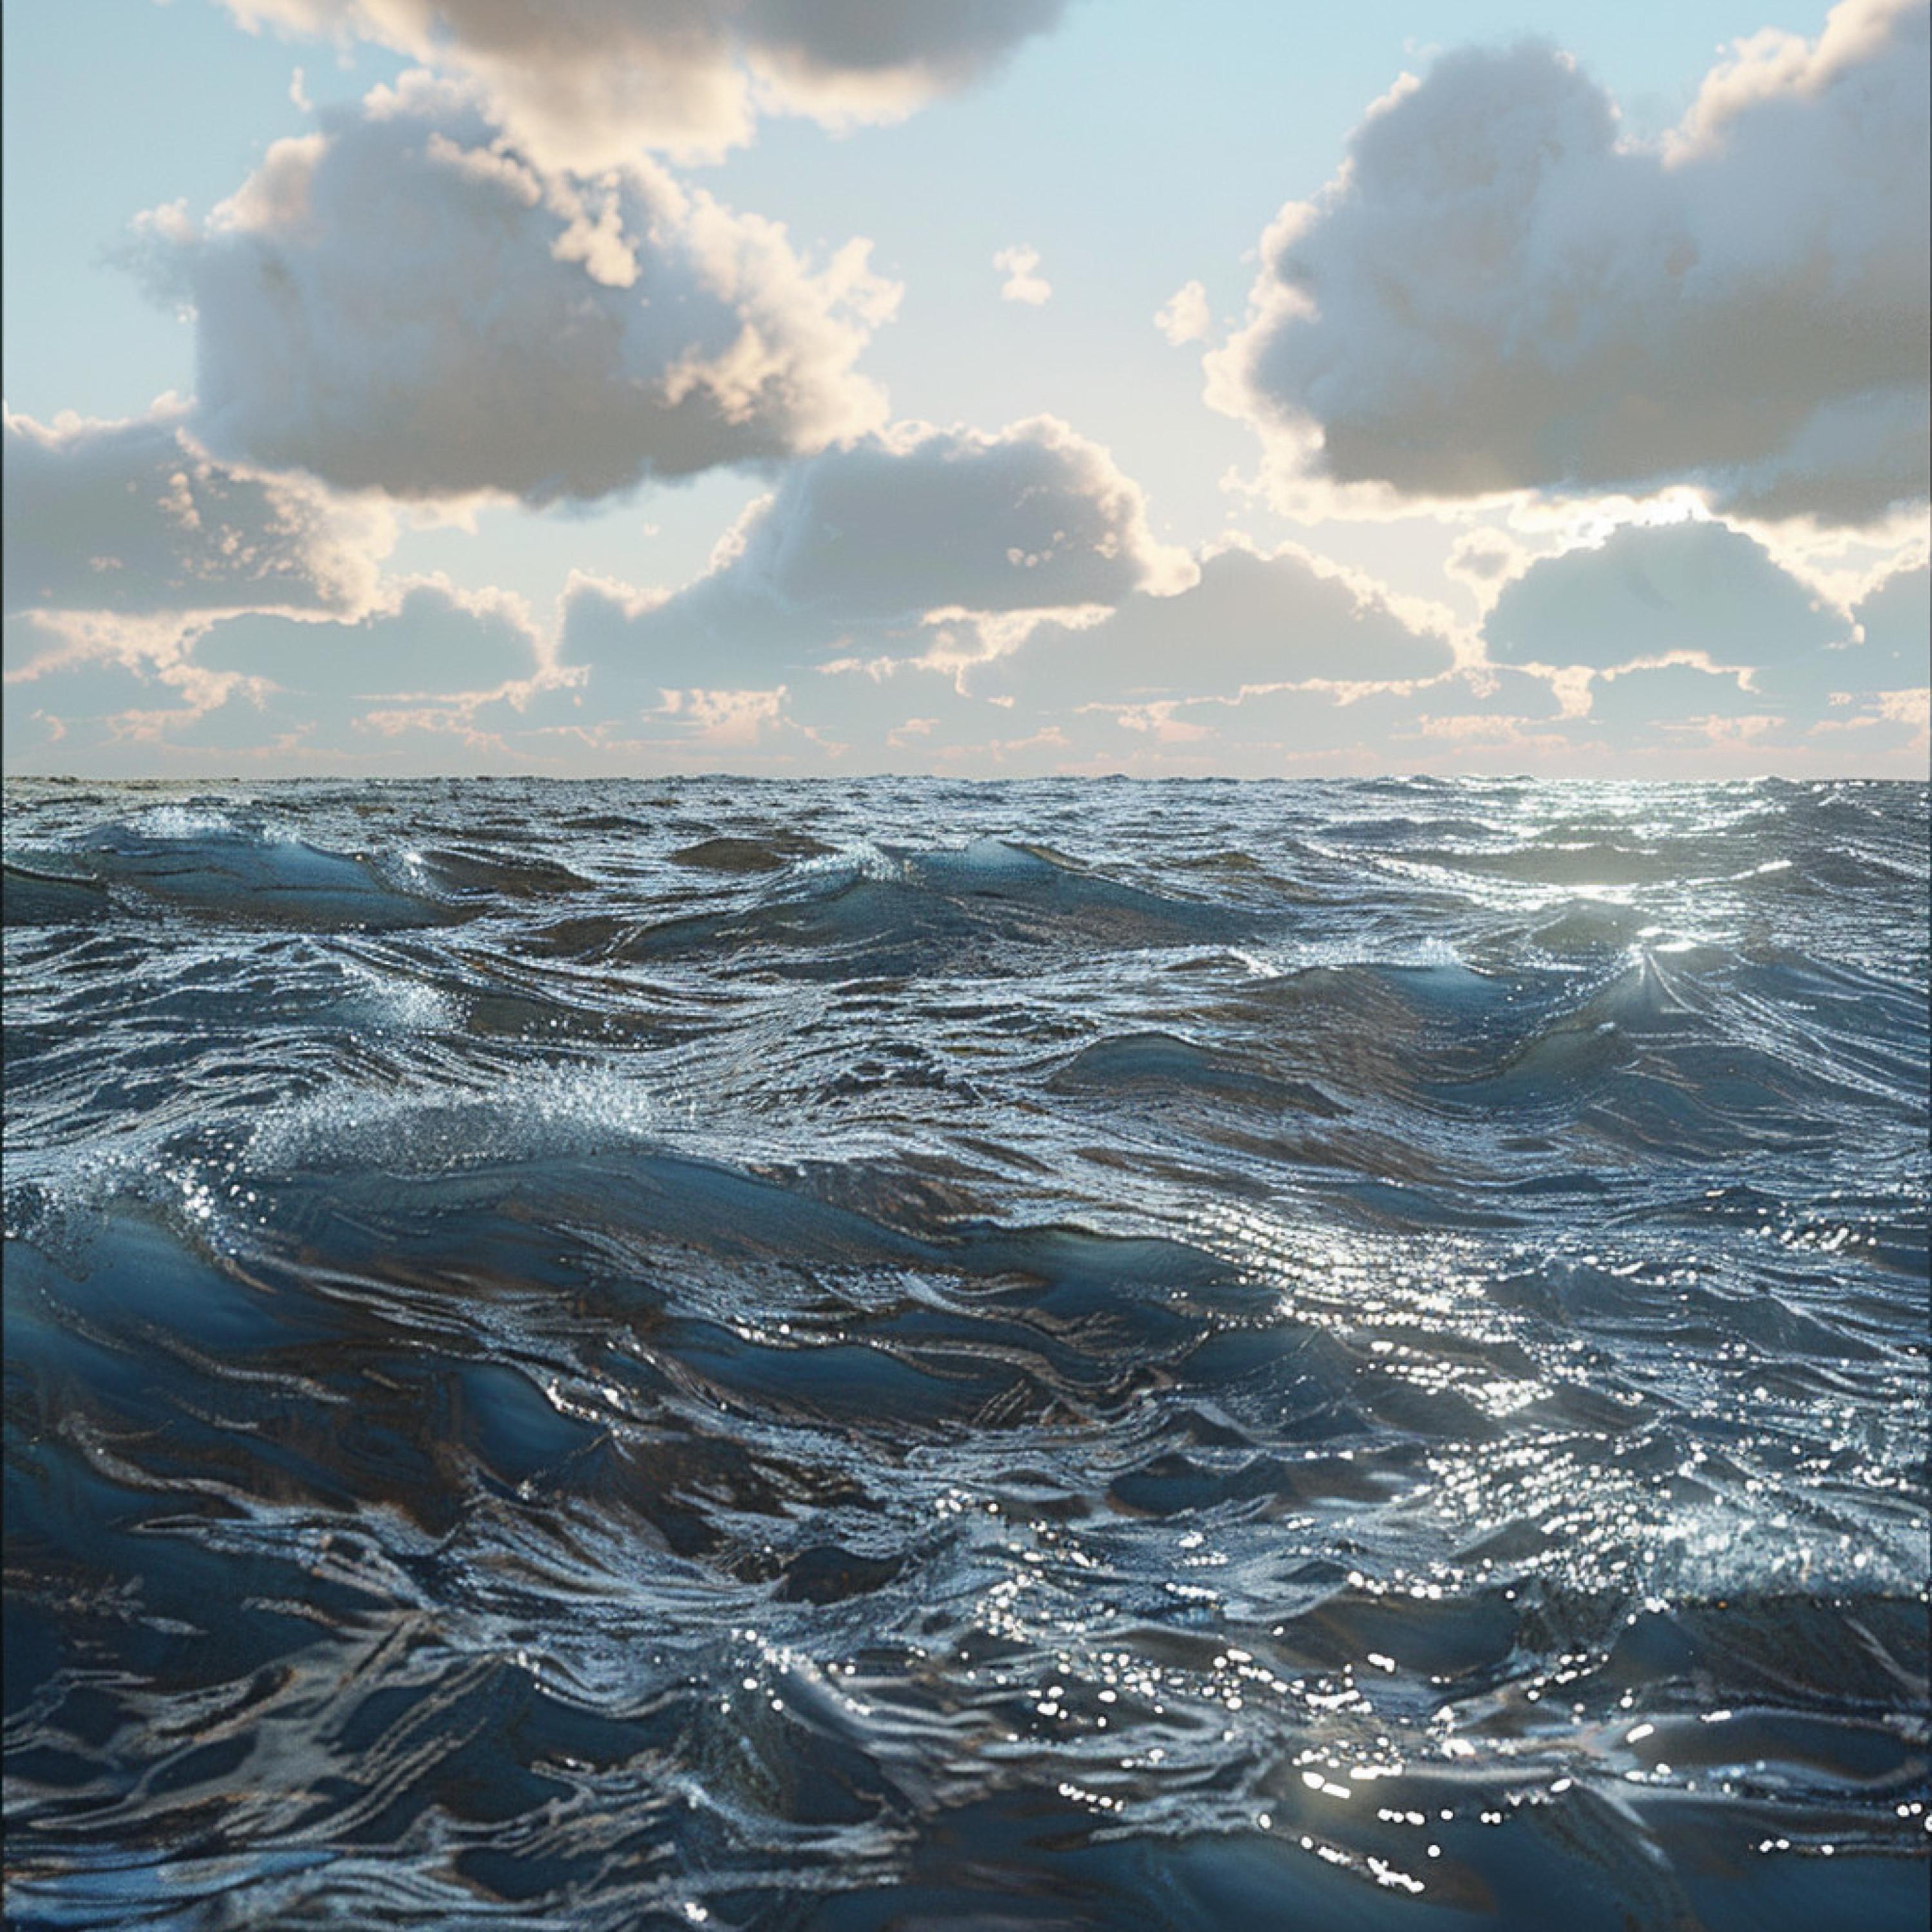 Selectrodynamic - Mindful Meditation with Ocean Waves